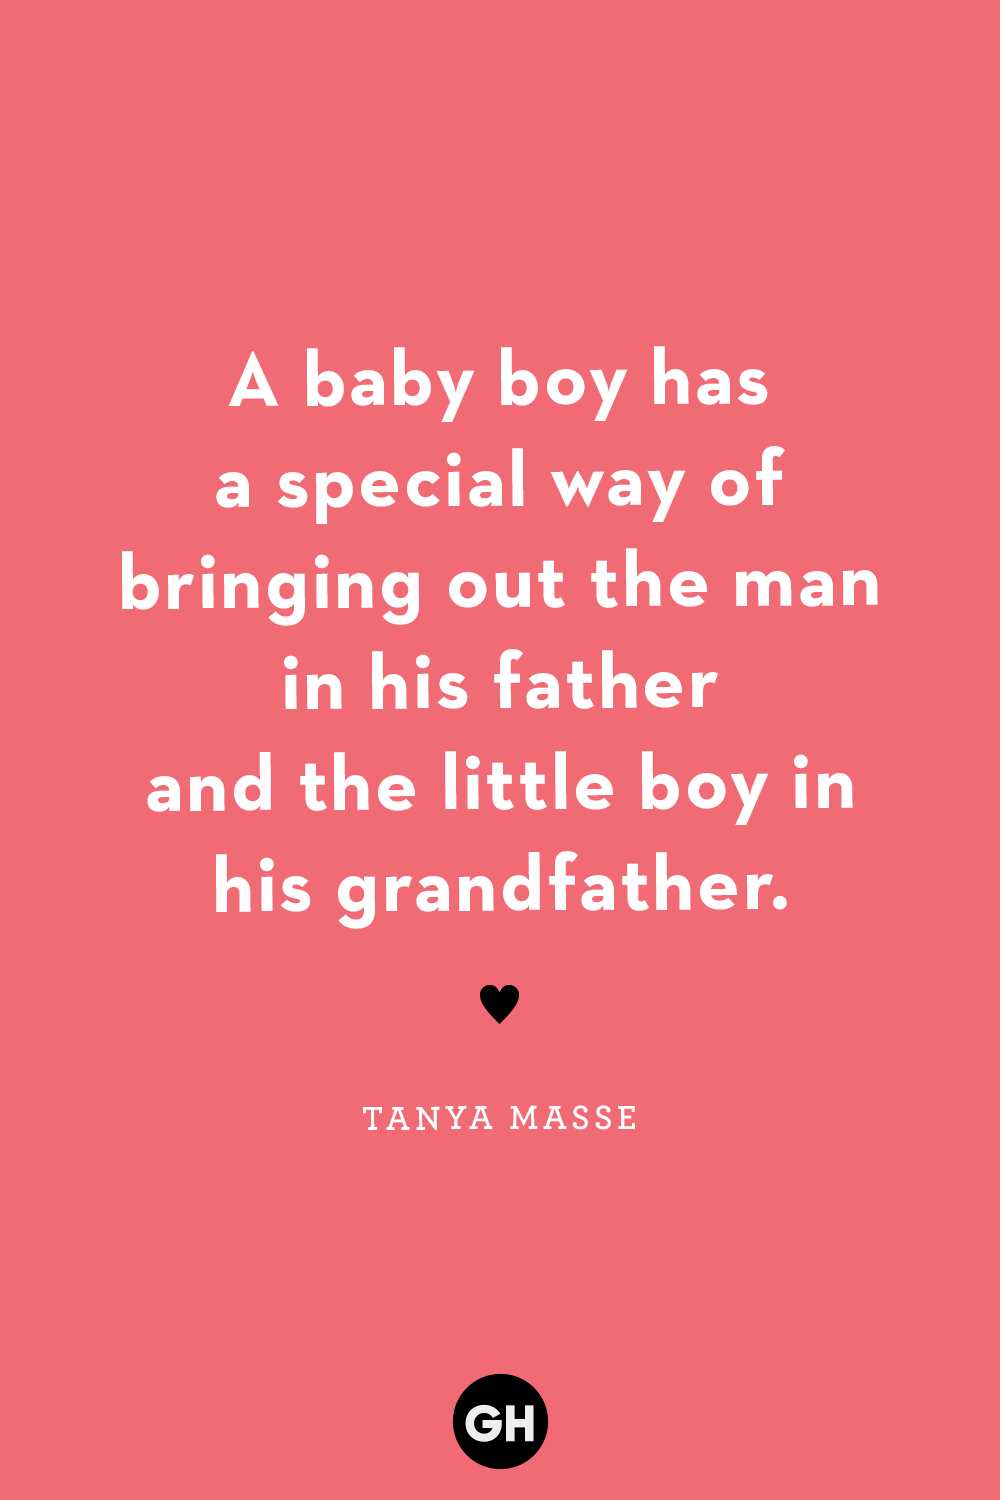 35 Inspiring And Cute Baby Quotes For New Parents Short Baby Quotes